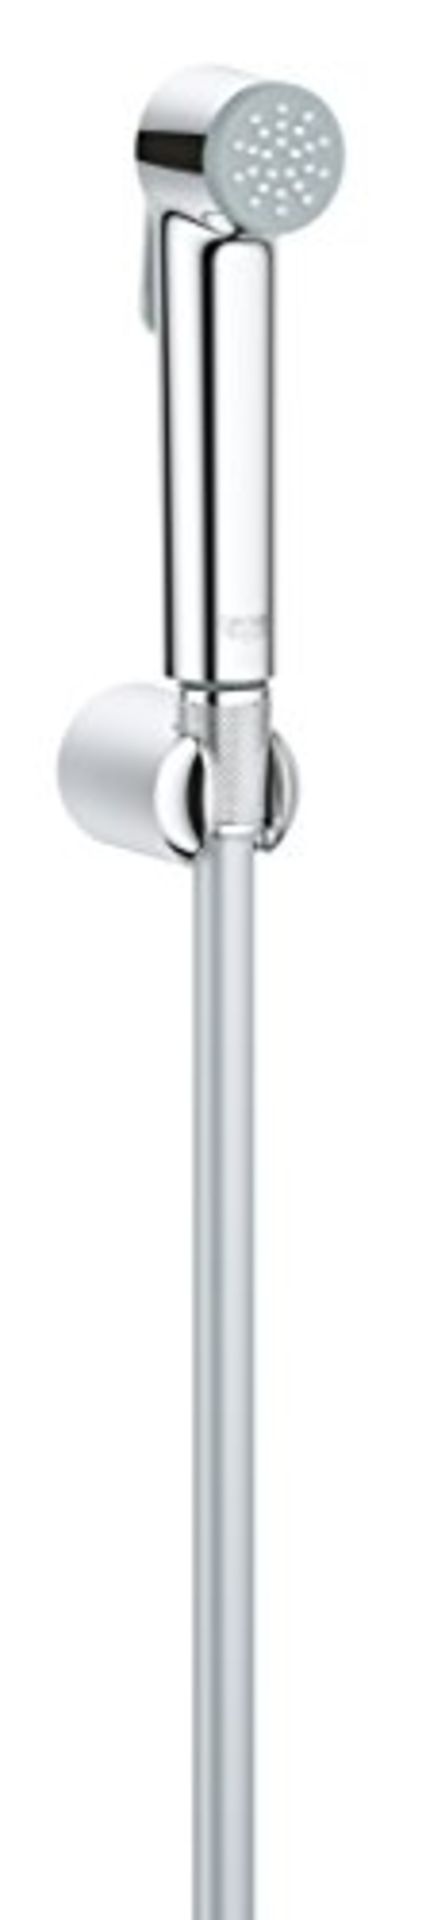 GROHE Tempesta-F Trigger Spray 30 - Wall Holder Set with Trigger-Control Hand Shower (